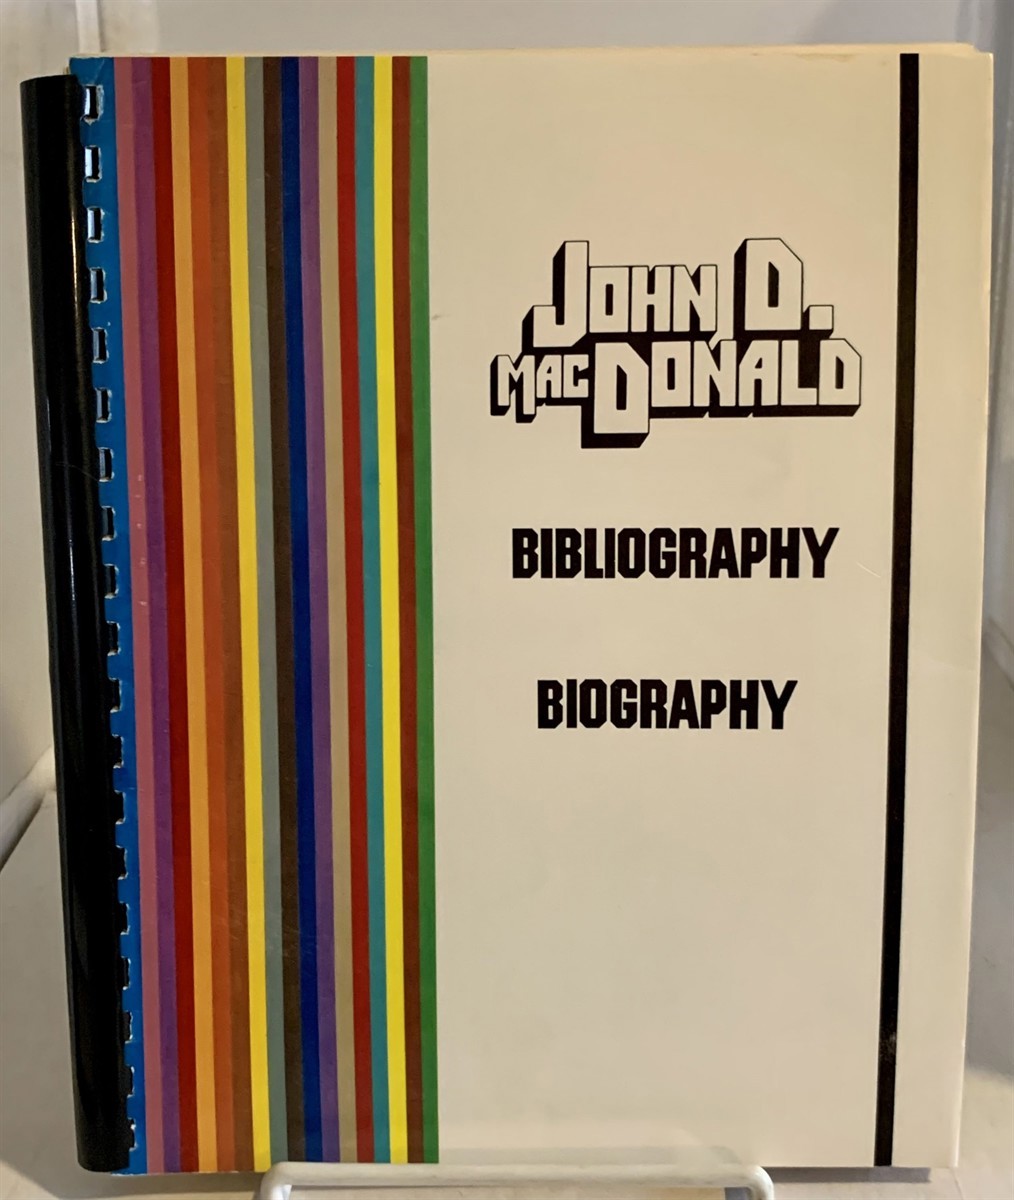 Image for A Bibliography of the Published Works of John D. Macdonald with Selected Biographical Materials and Critical Essays